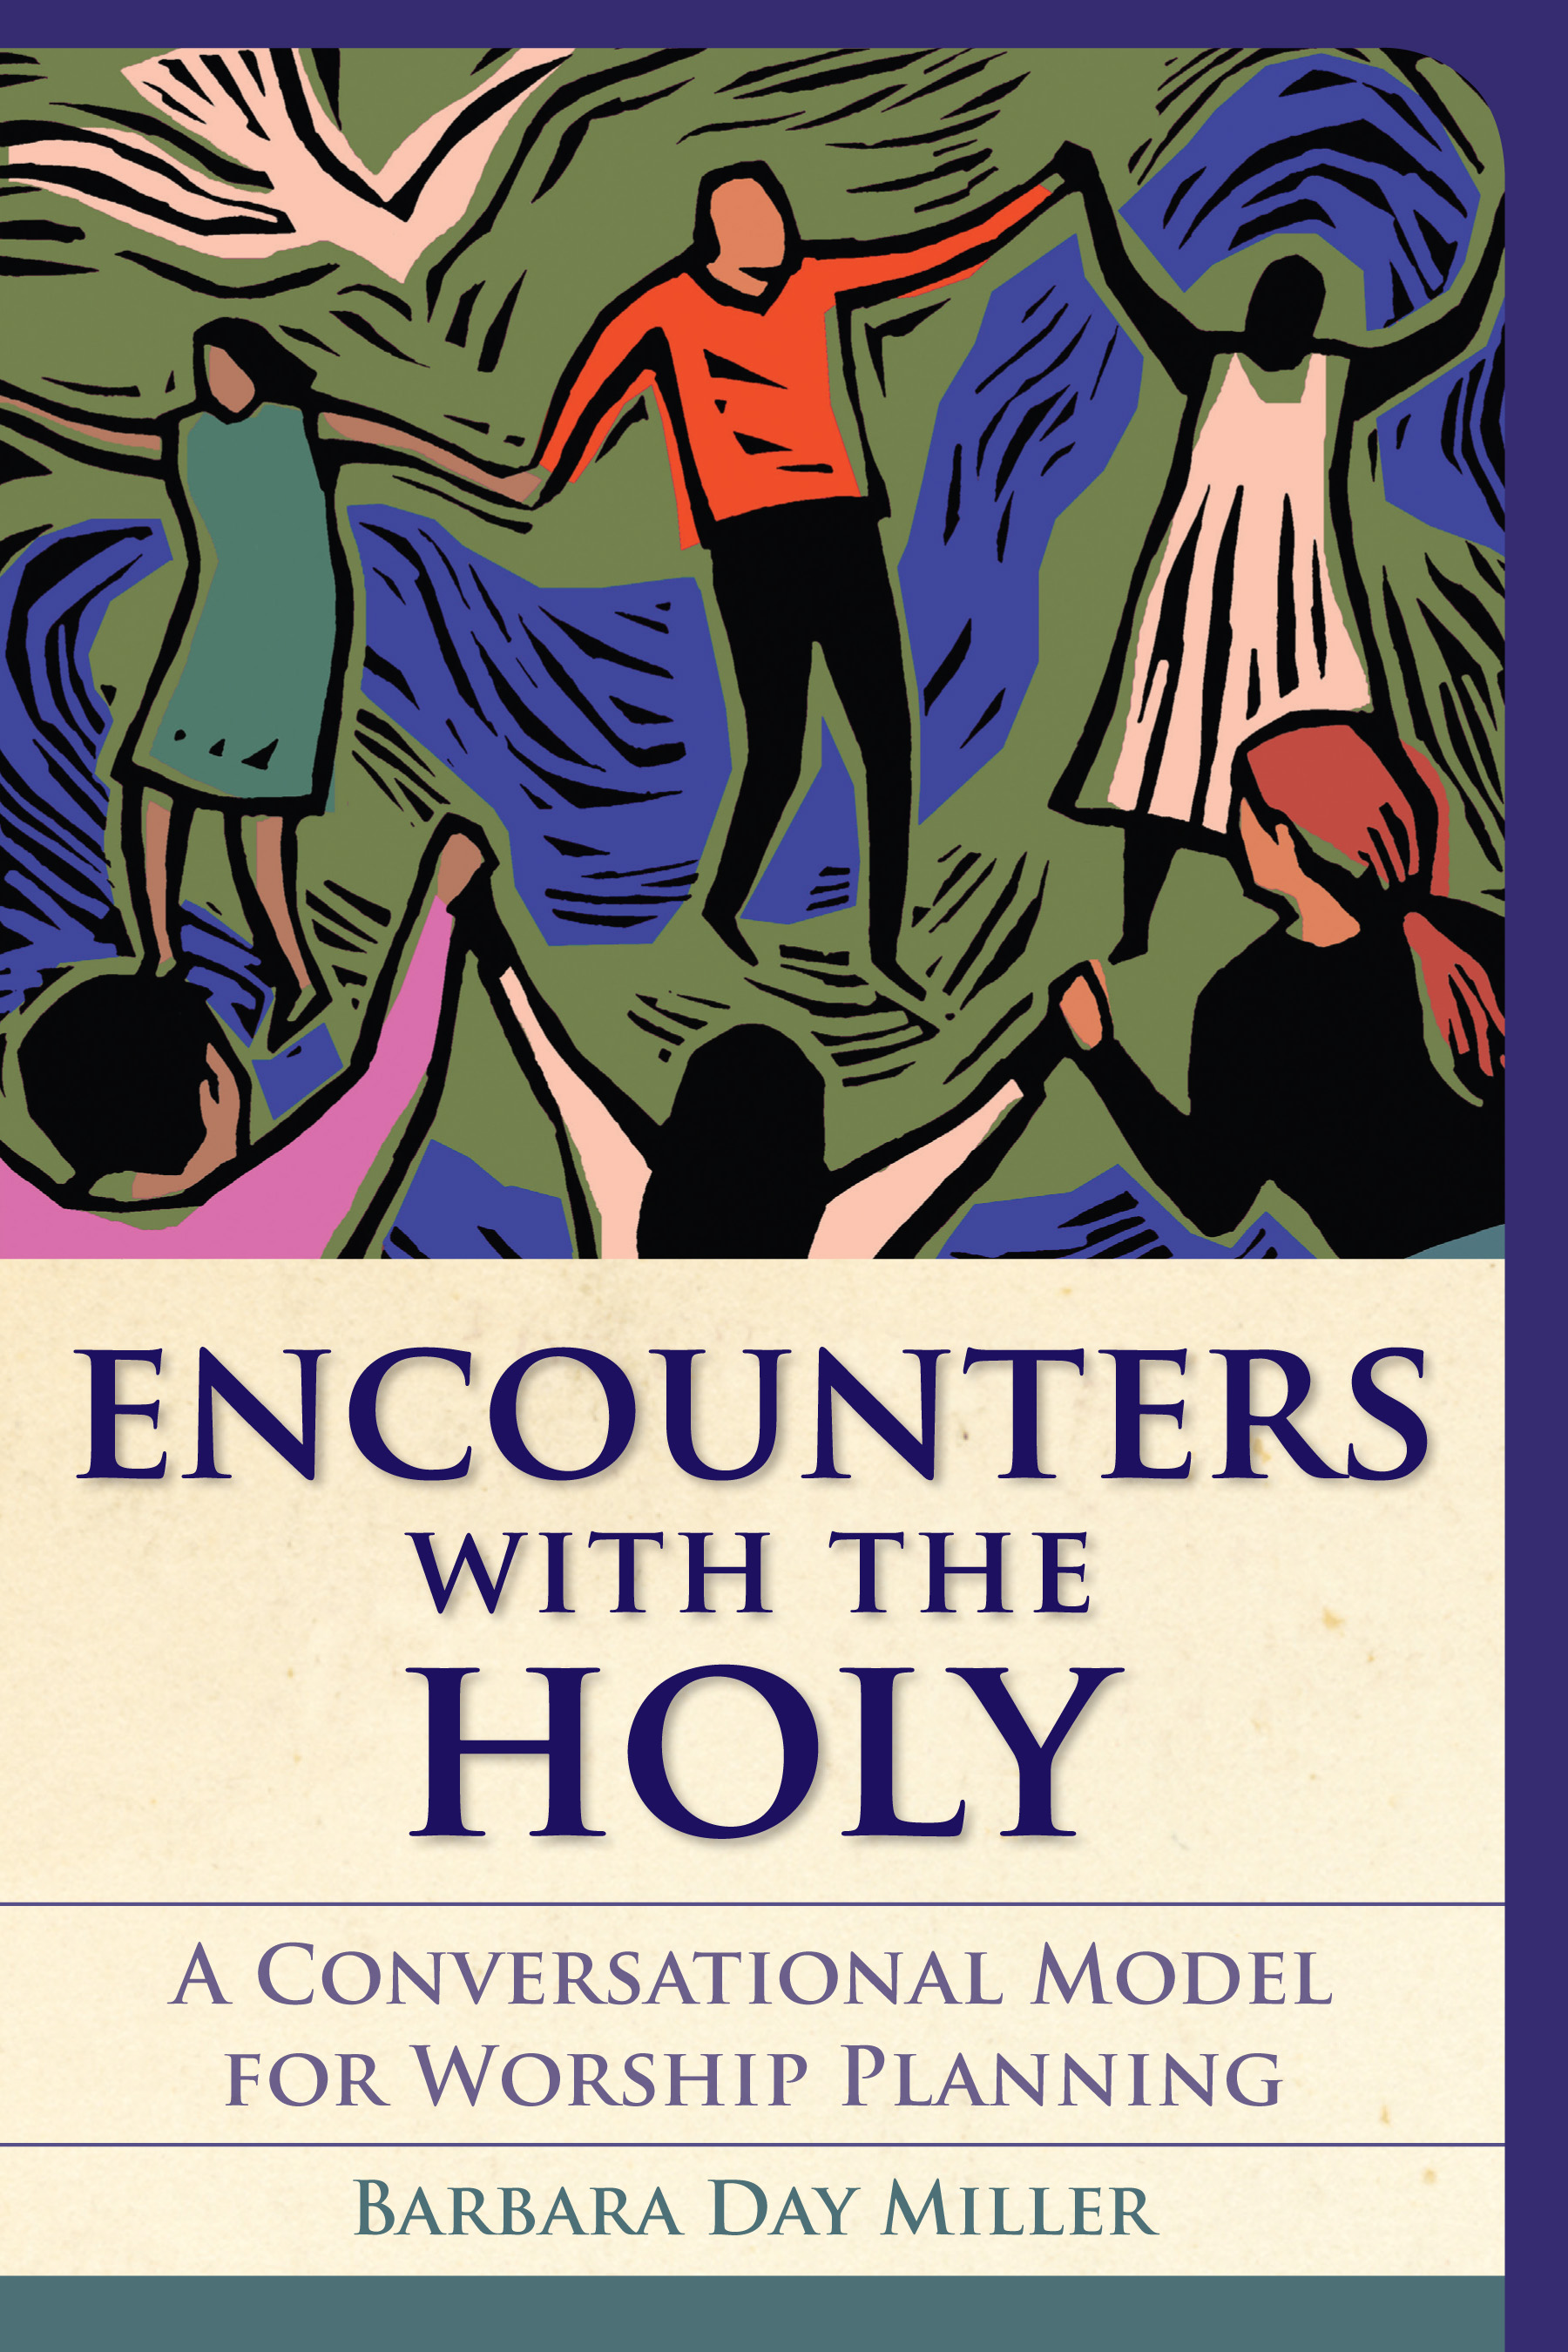 Encounters with the Holy: A Conversational Model for Worship Planning